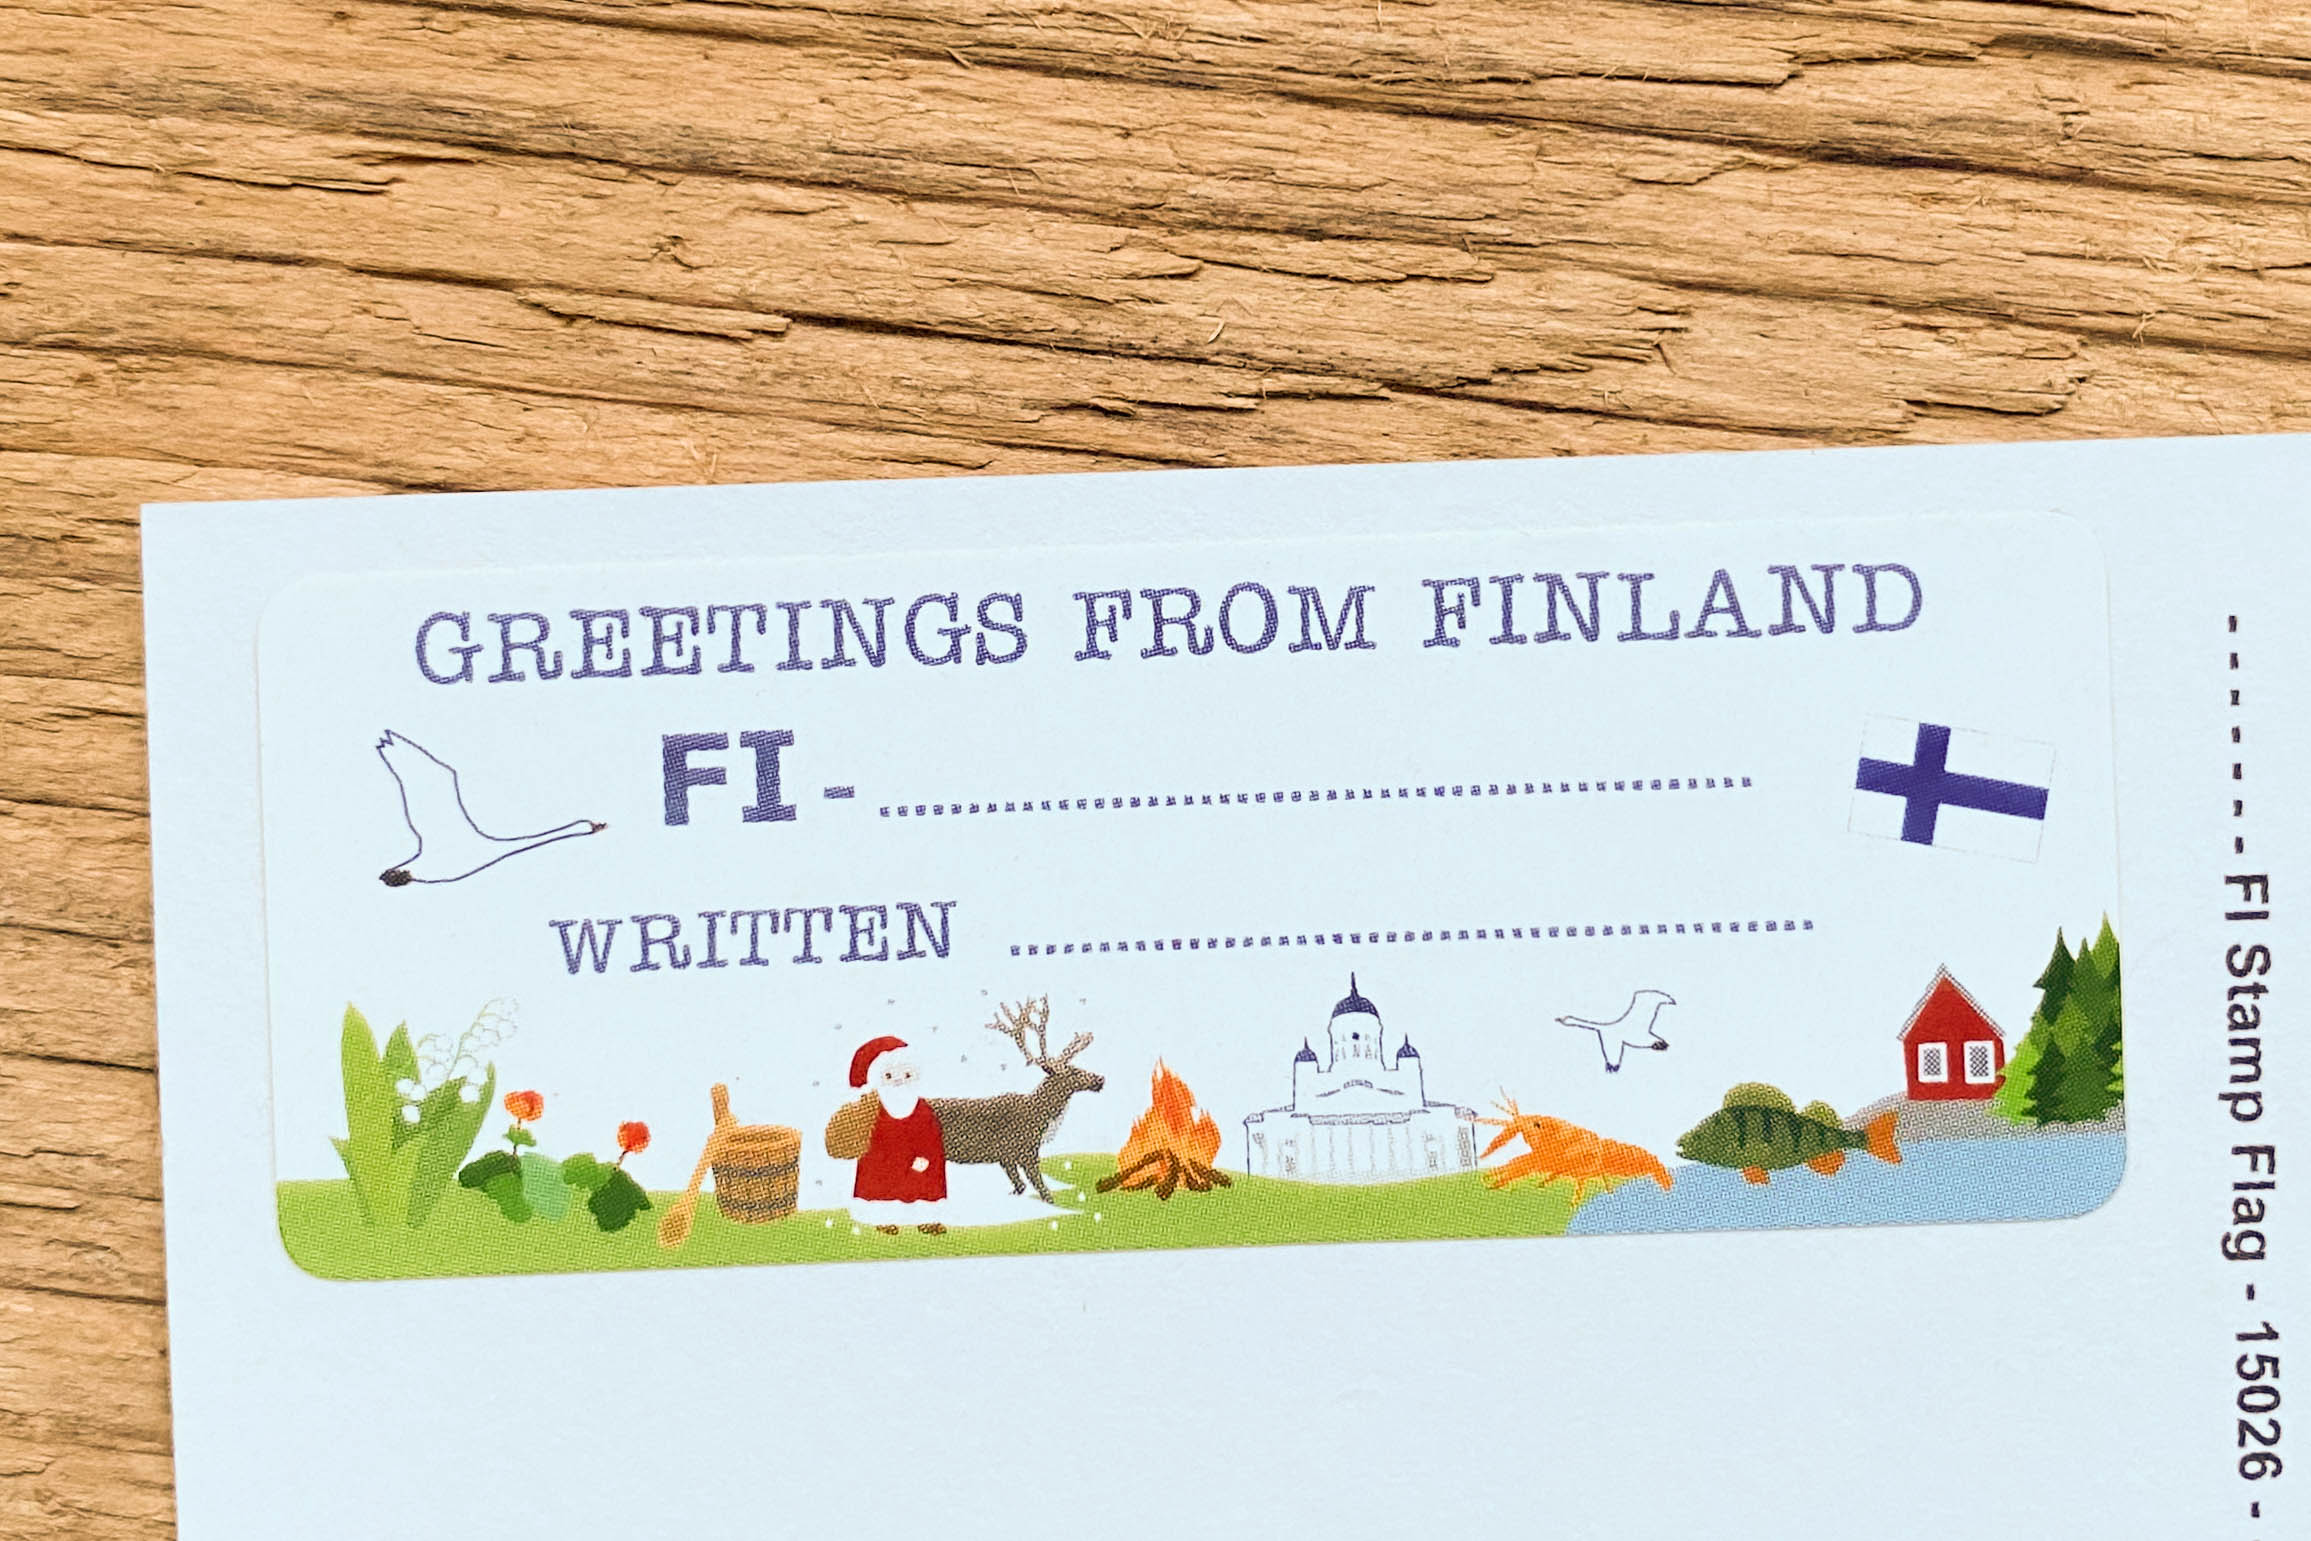 Greetings from Finland Postcard ID Sticker Set 40 pieces